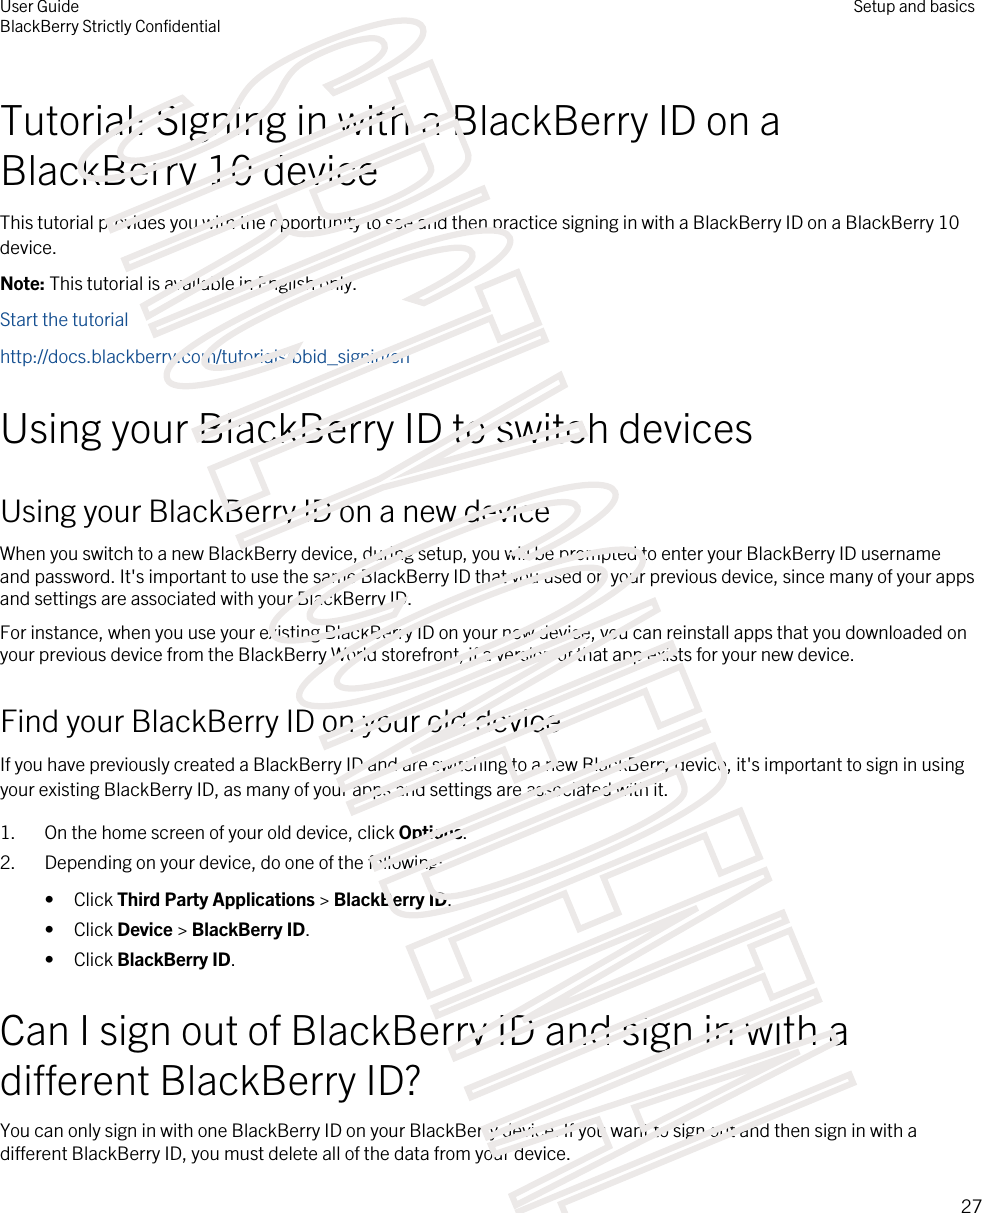 Tutorial: Signing in with a BlackBerry ID on a BlackBerry 10 deviceThis tutorial provides you with the opportunity to see and then practice signing in with a BlackBerry ID on a BlackBerry 10 device.Note: This tutorial is available in English only.Start the tutorialhttp://docs.blackberry.com/tutorials/bbid_signin/enUsing your BlackBerry ID to switch devicesUsing your BlackBerry ID on a new deviceWhen you switch to a new BlackBerry device, during setup, you will be prompted to enter your BlackBerry ID username and password. It&apos;s important to use the same BlackBerry ID that you used on your previous device, since many of your apps and settings are associated with your BlackBerry ID.For instance, when you use your existing BlackBerry ID on your new device, you can reinstall apps that you downloaded on your previous device from the BlackBerry World storefront, if a version of that app exists for your new device.Find your BlackBerry ID on your old deviceIf you have previously created a BlackBerry ID and are switching to a new BlackBerry device, it&apos;s important to sign in using your existing BlackBerry ID, as many of your apps and settings are associated with it.1. On the home screen of your old device, click Options.2. Depending on your device, do one of the following:• Click Third Party Applications &gt; BlackBerry ID.• Click Device &gt; BlackBerry ID.• Click BlackBerry ID.Can I sign out of BlackBerry ID and sign in with a different BlackBerry ID?You can only sign in with one BlackBerry ID on your BlackBerry device. If you want to sign out and then sign in with a different BlackBerry ID, you must delete all of the data from your device.User GuideBlackBerry Strictly ConfidentialSetup and basics27STRICTLY CONFIDENTIAL